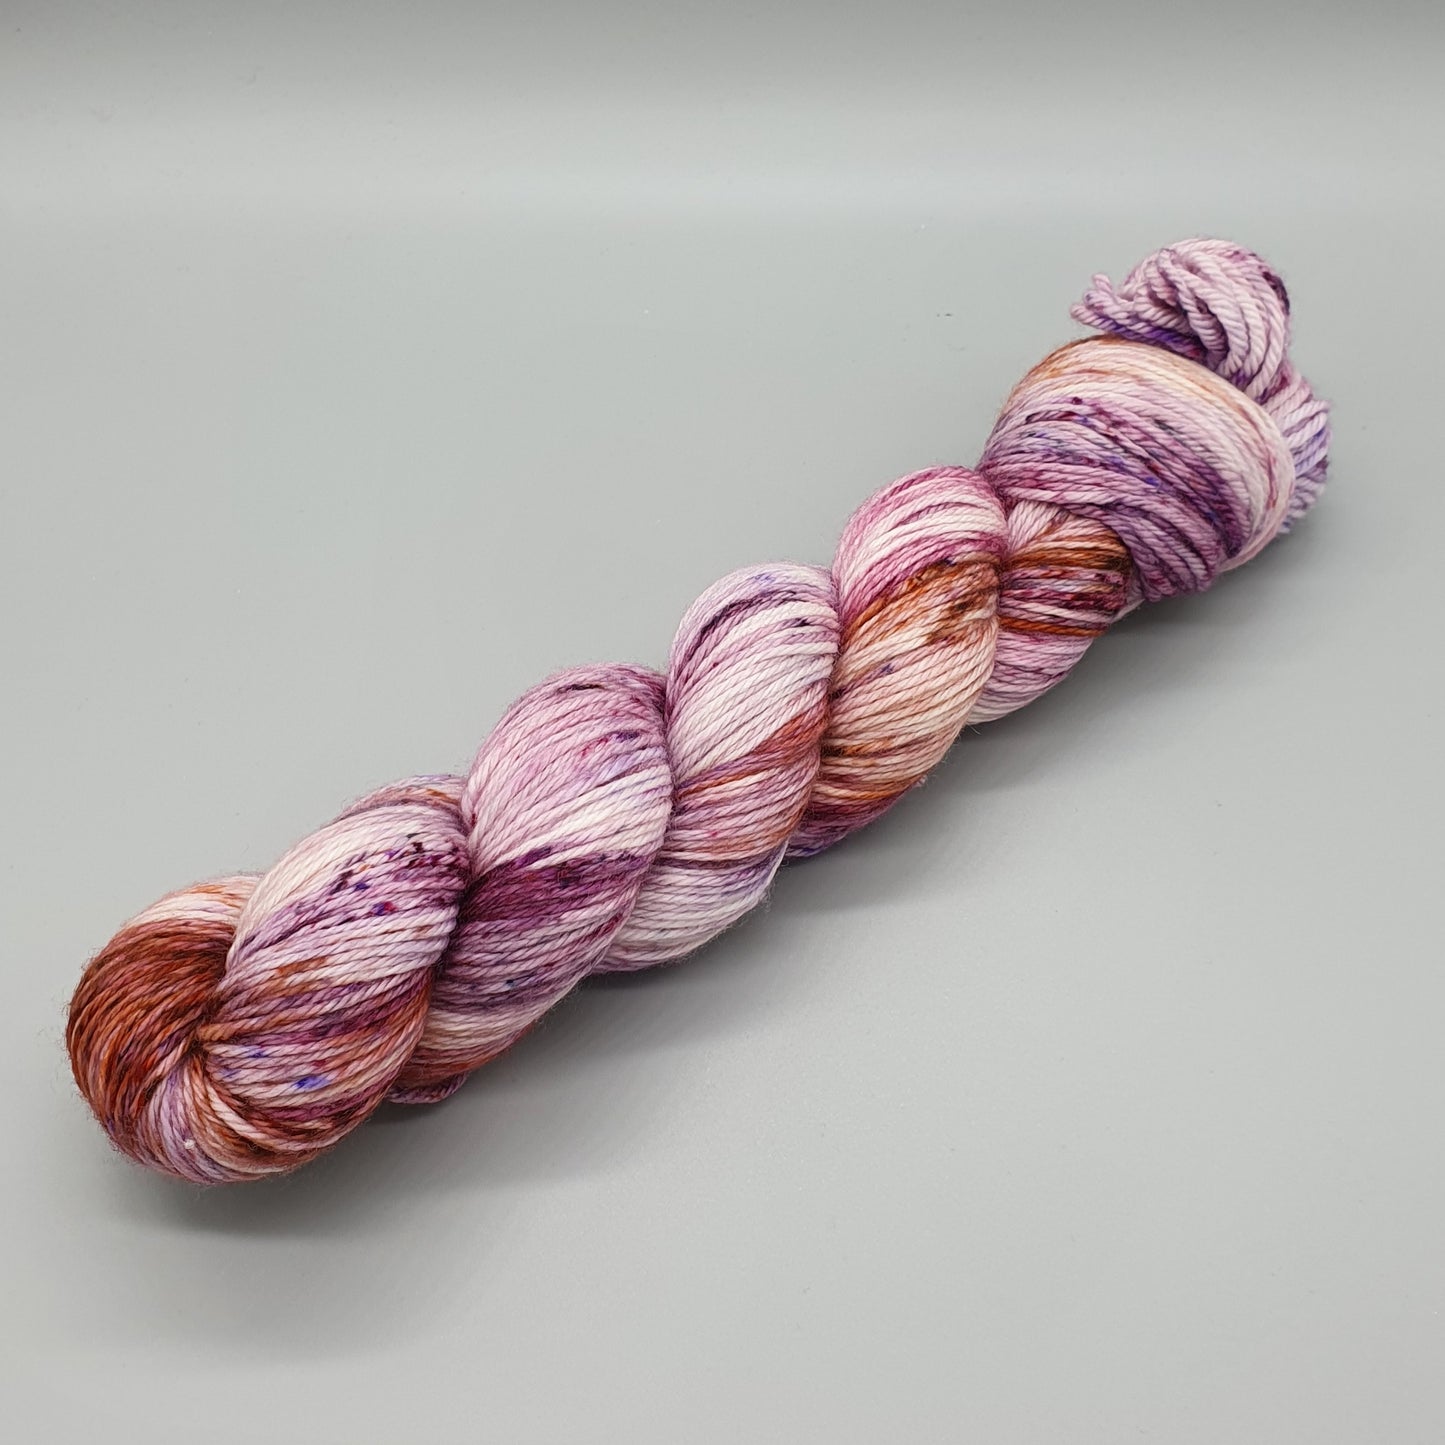 DYED TO ORDER - A Gift For Susan